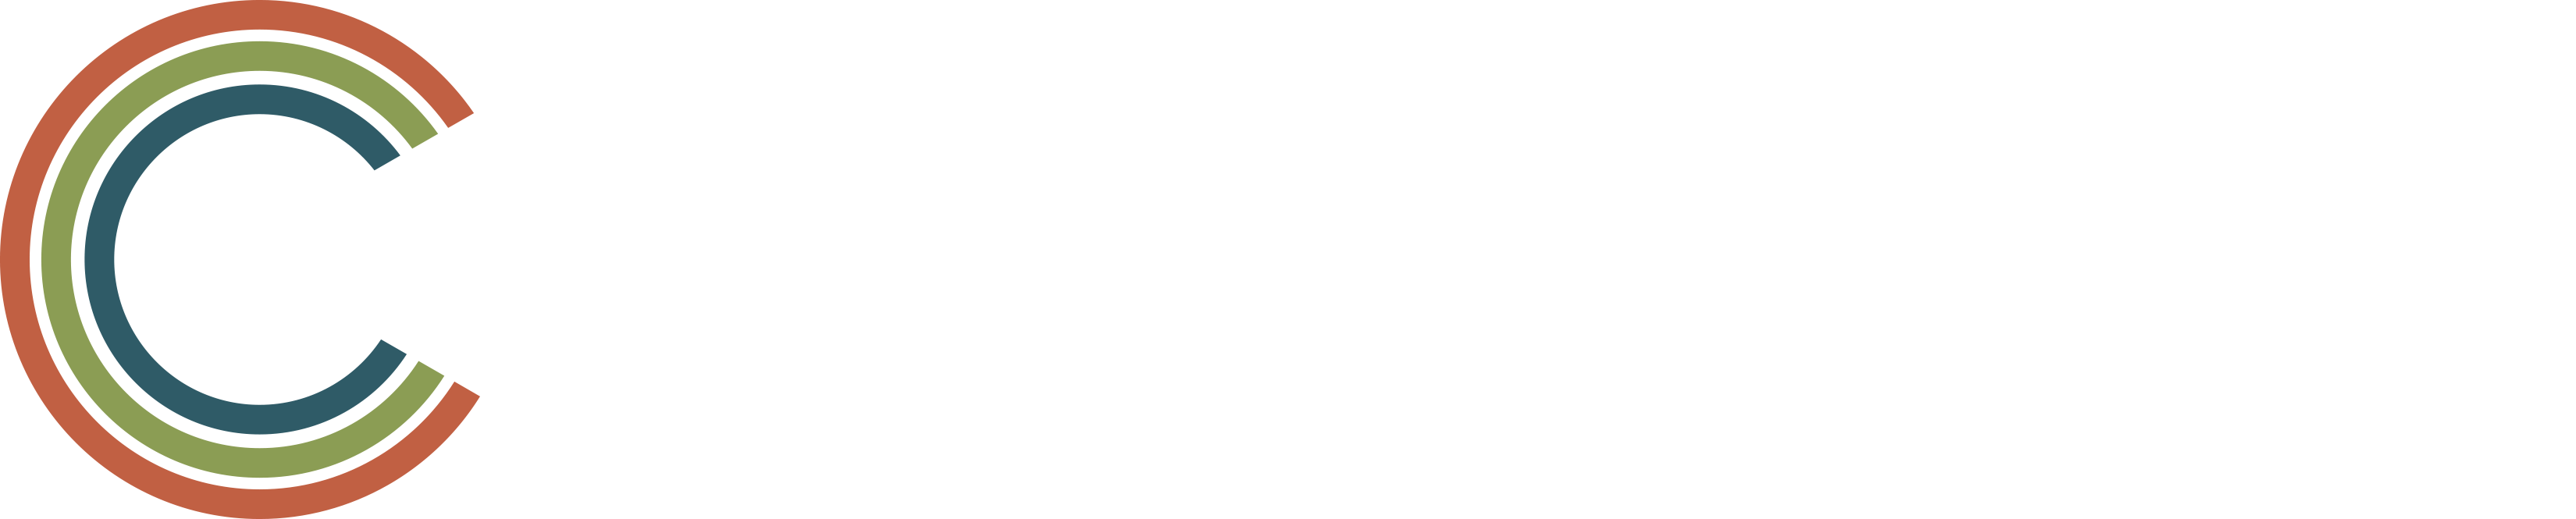 ACAPT Center for Excellence in Academic Physical Therapy